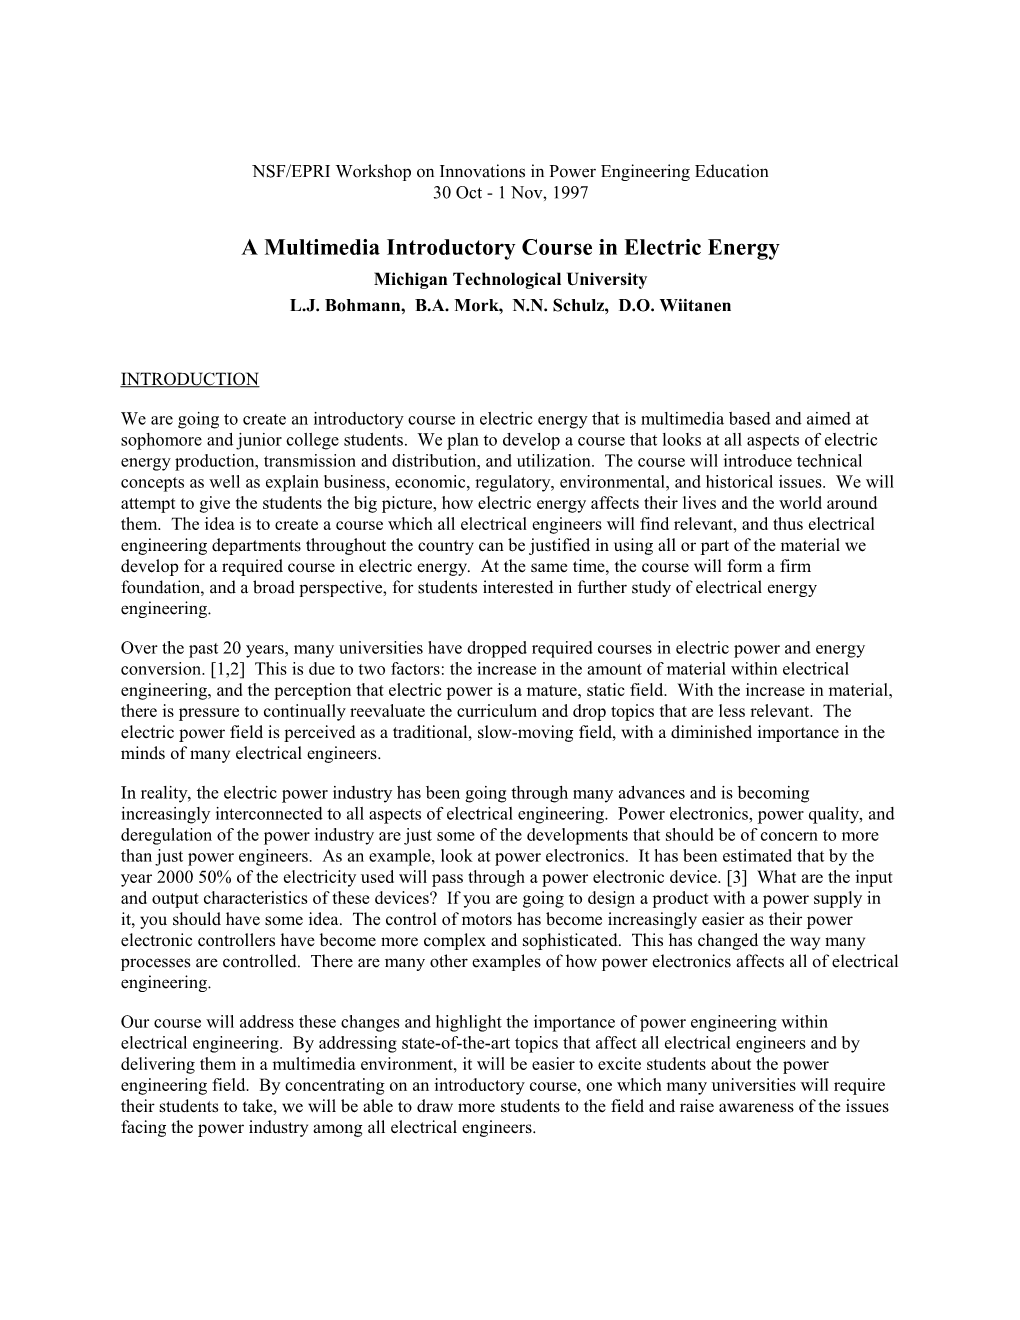 A Multimedia Introductory Course in Electric Energy